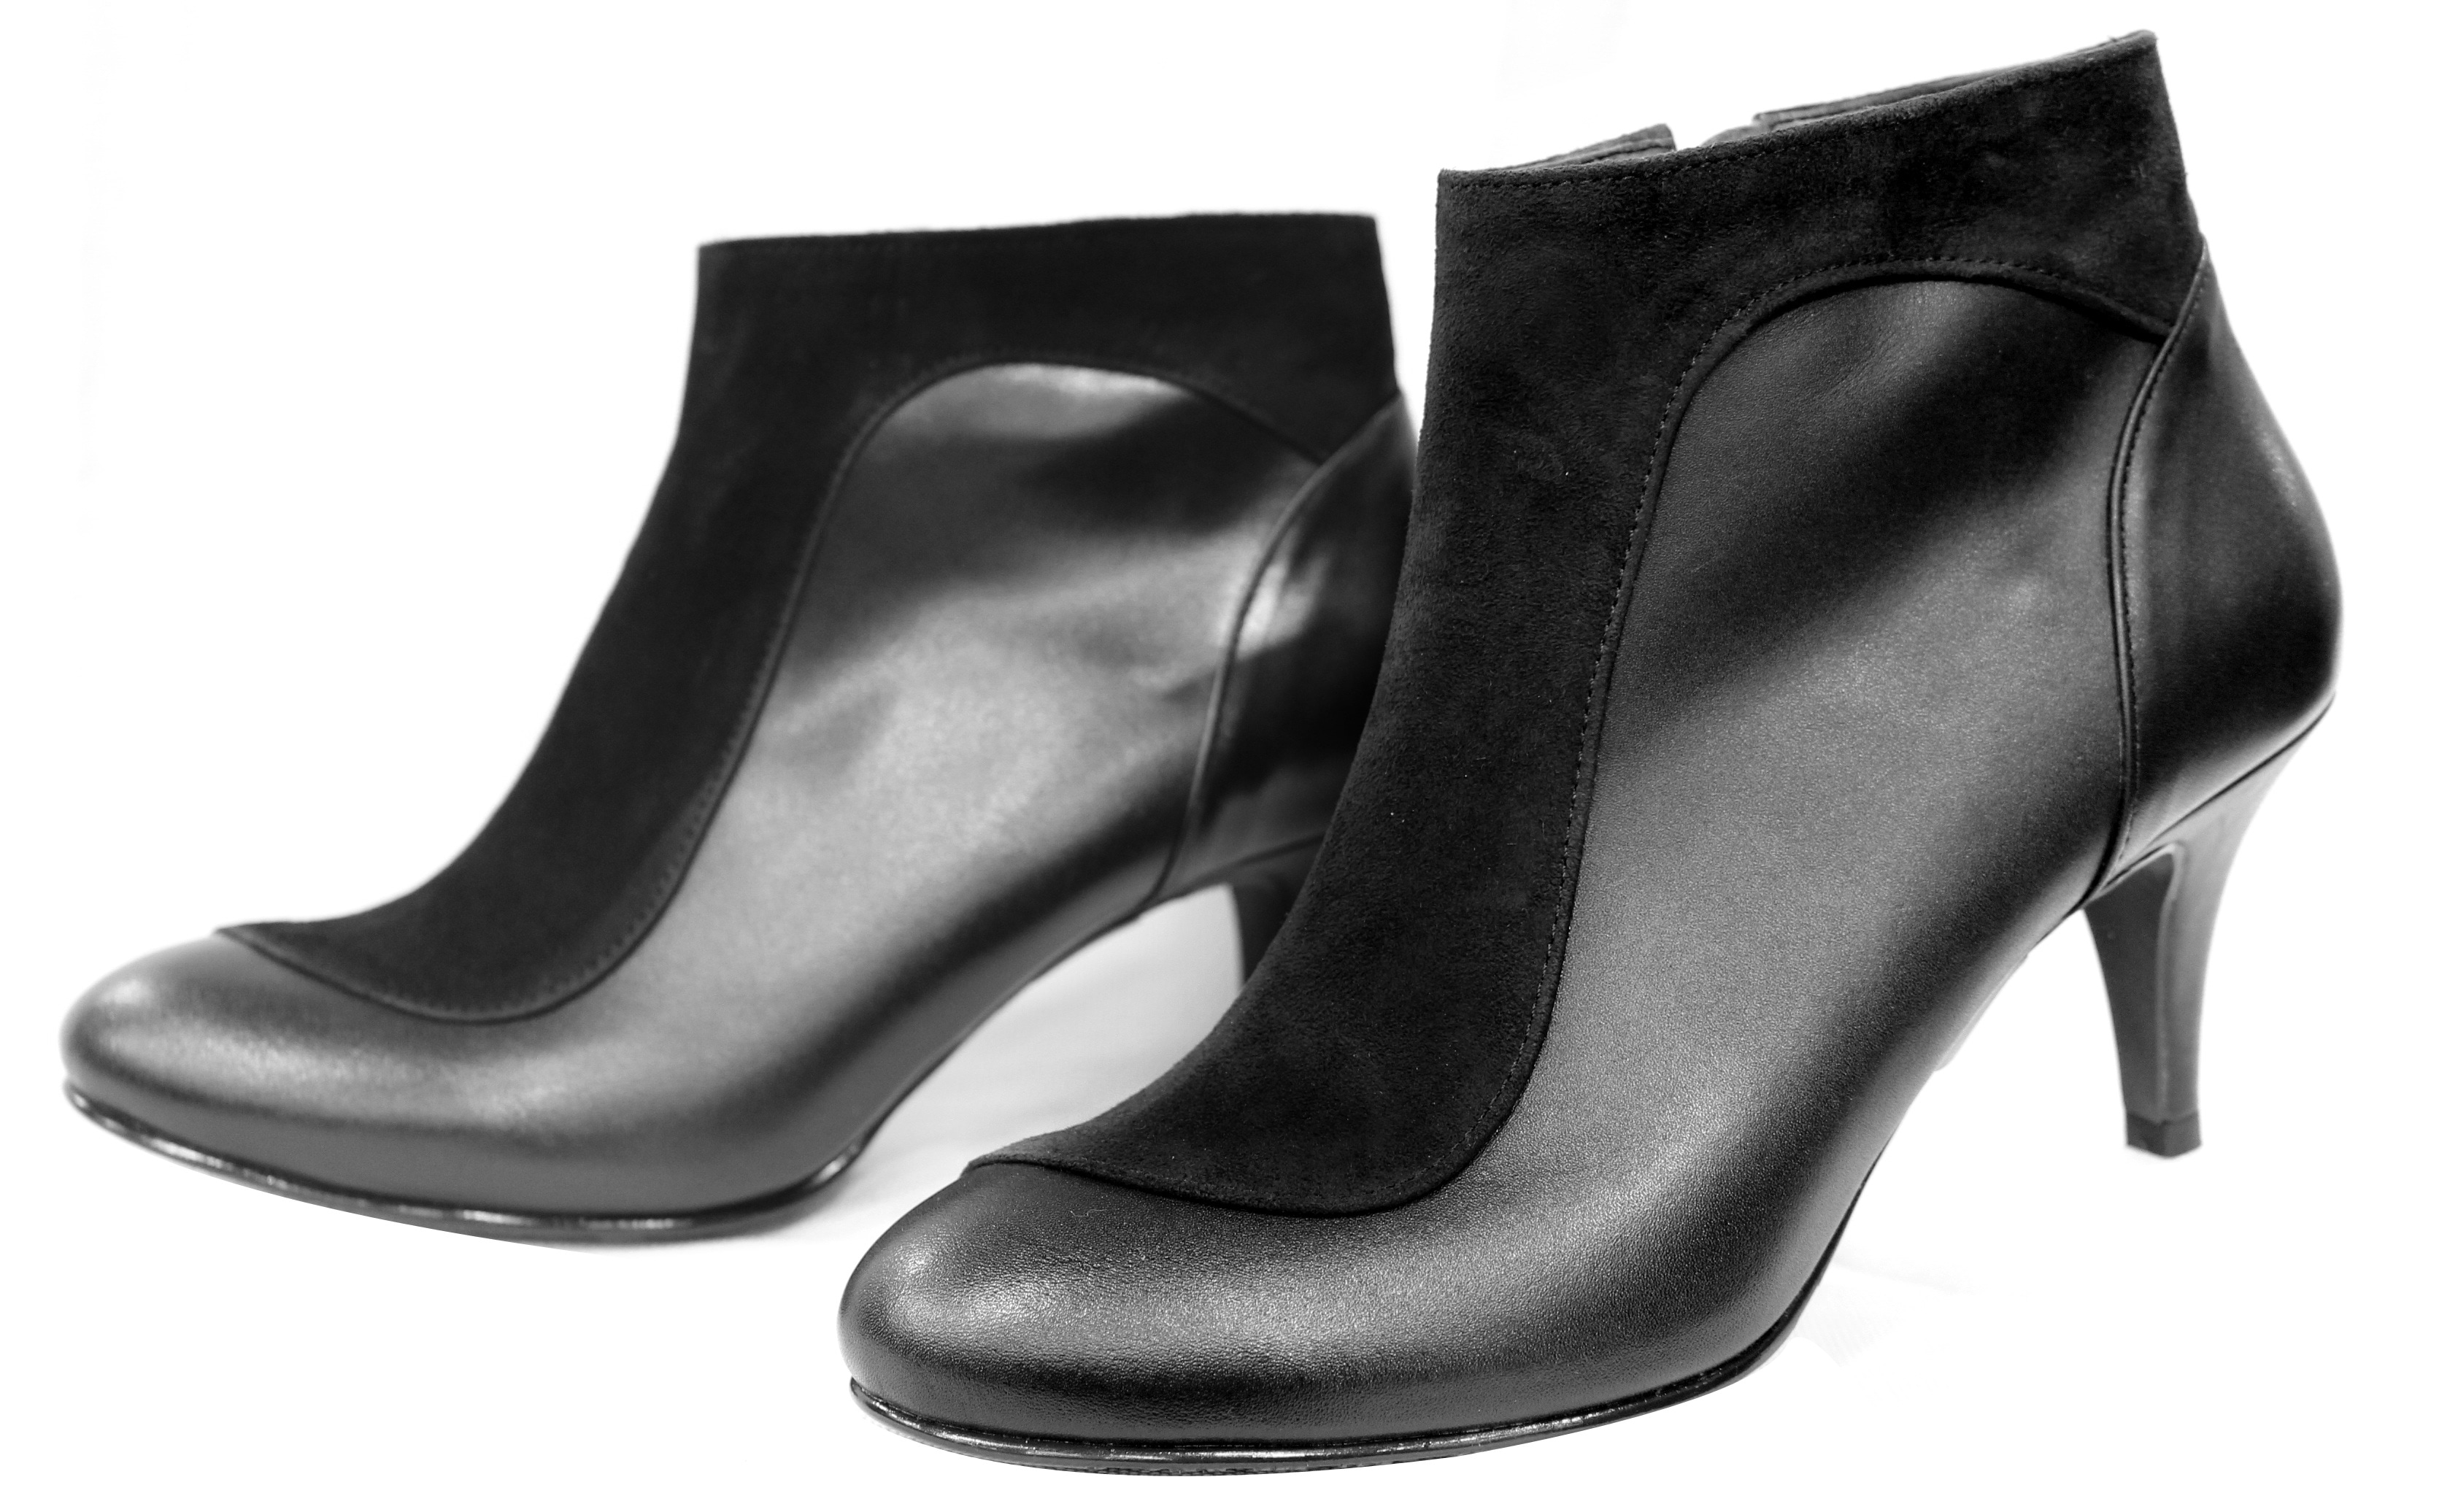 black and gray leather heeled ankle boots